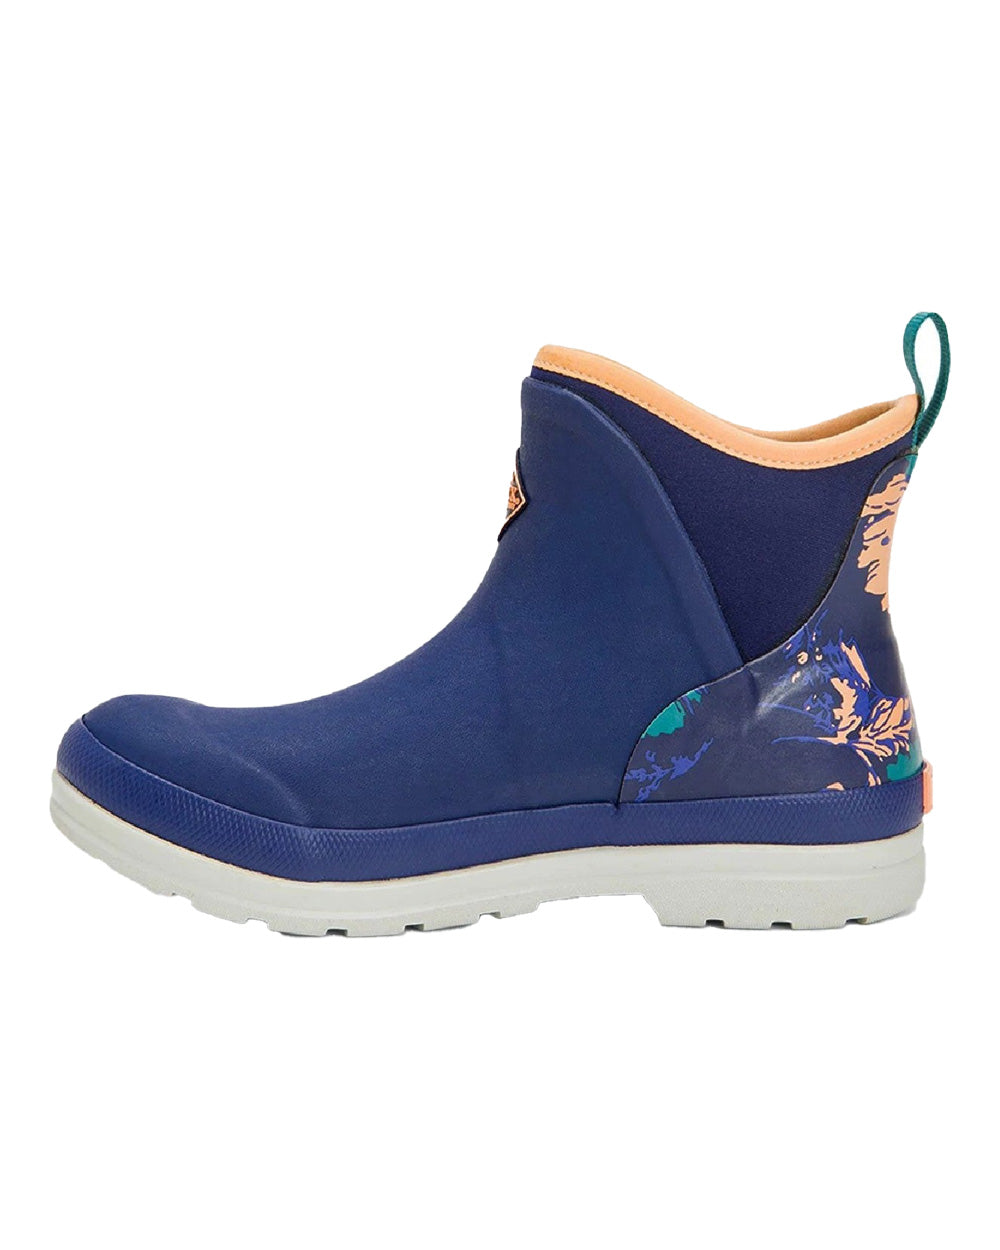 Astra Aura/Floral coloured Muck Boots Womens Original Pull-on Ankle Boots